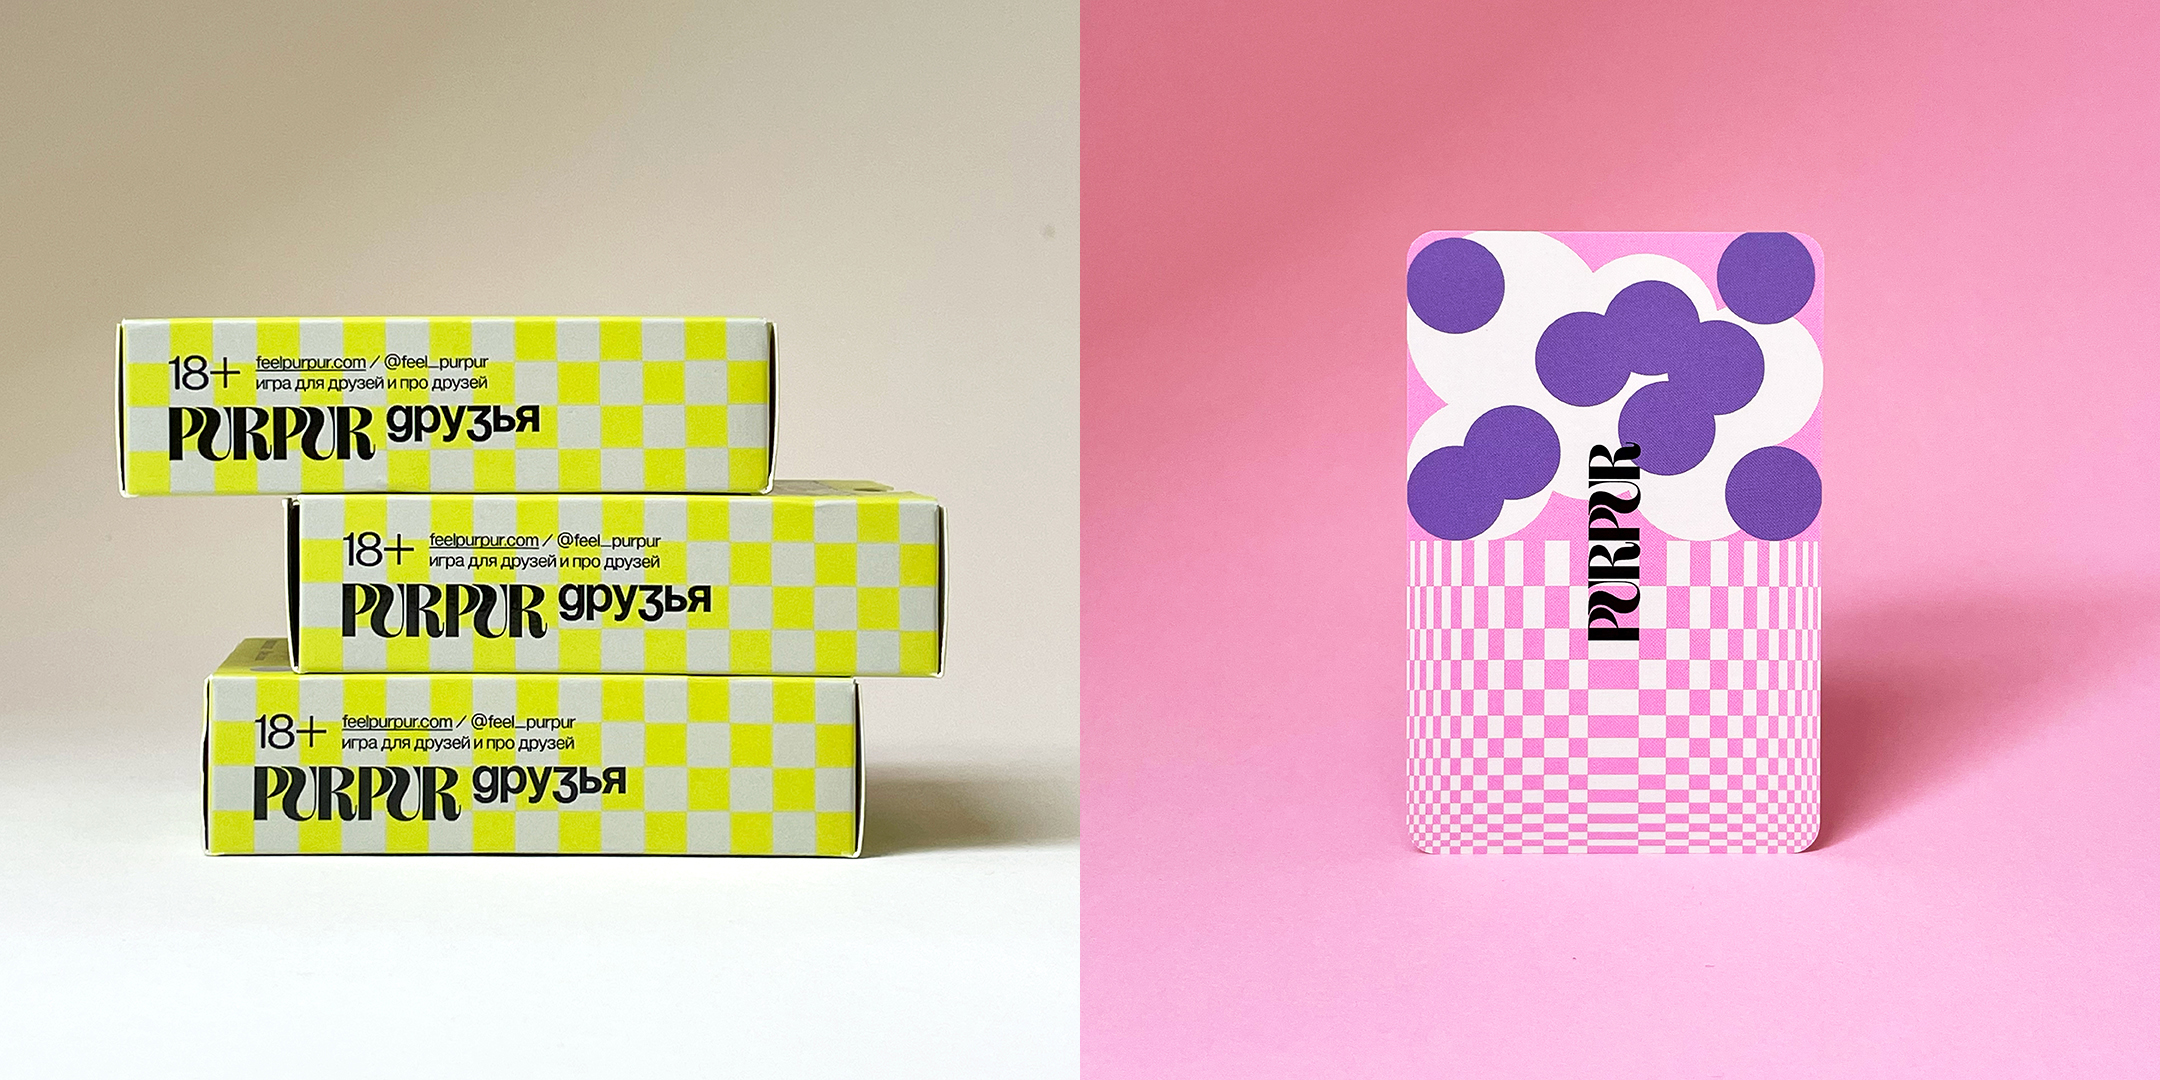 A Clever Card Game Design That Takes Players From Awkward Questions To Psychedelic Dominoes